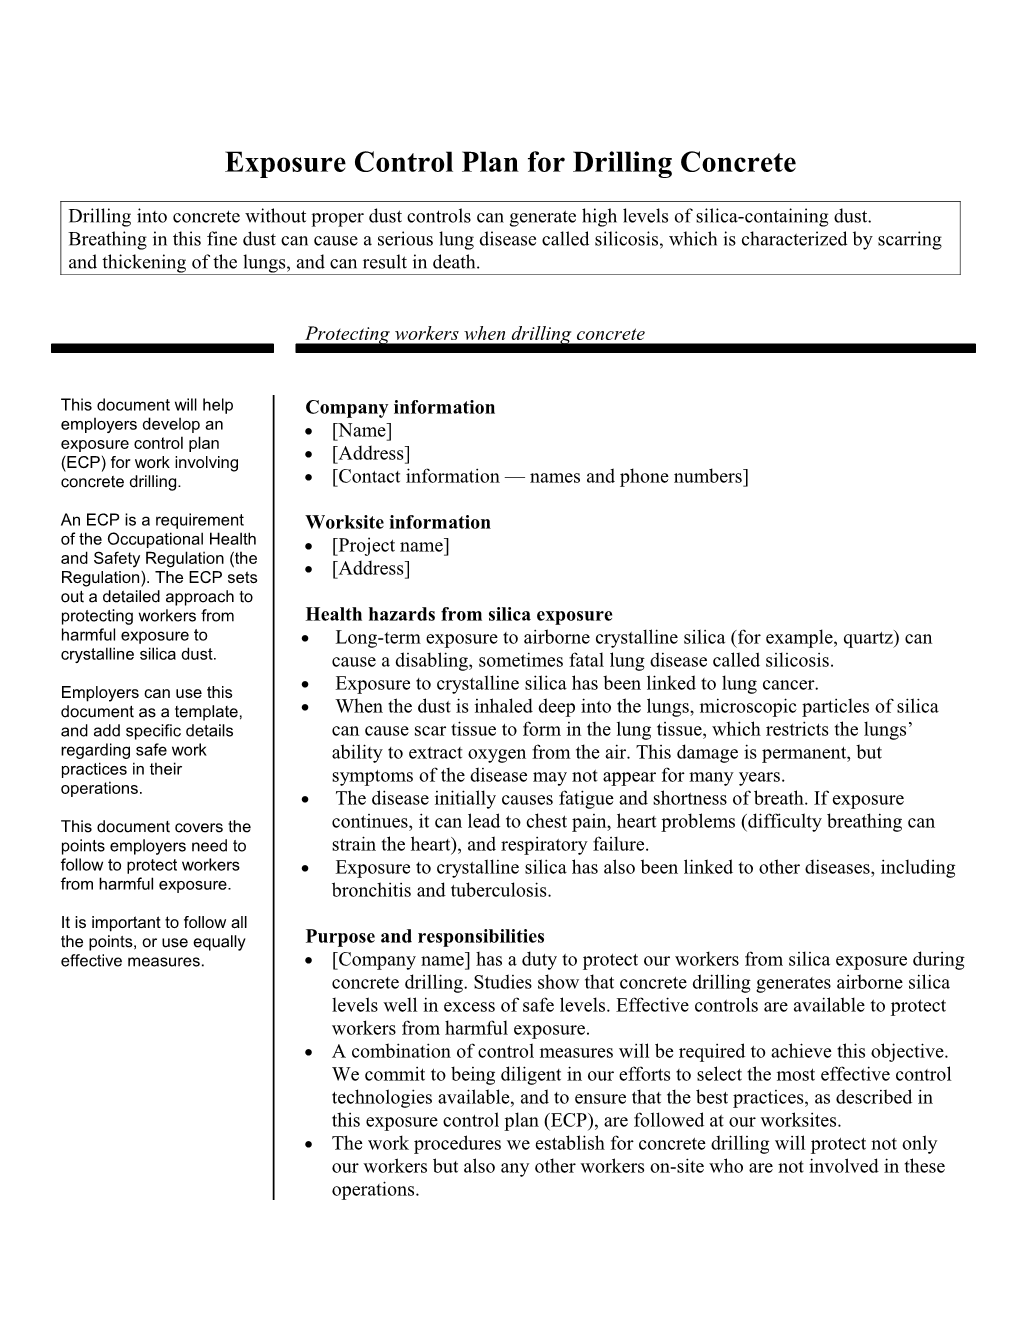 Exposure Control Plan for Cutting, Grinding, and Polishing Stone Containing Crystalline